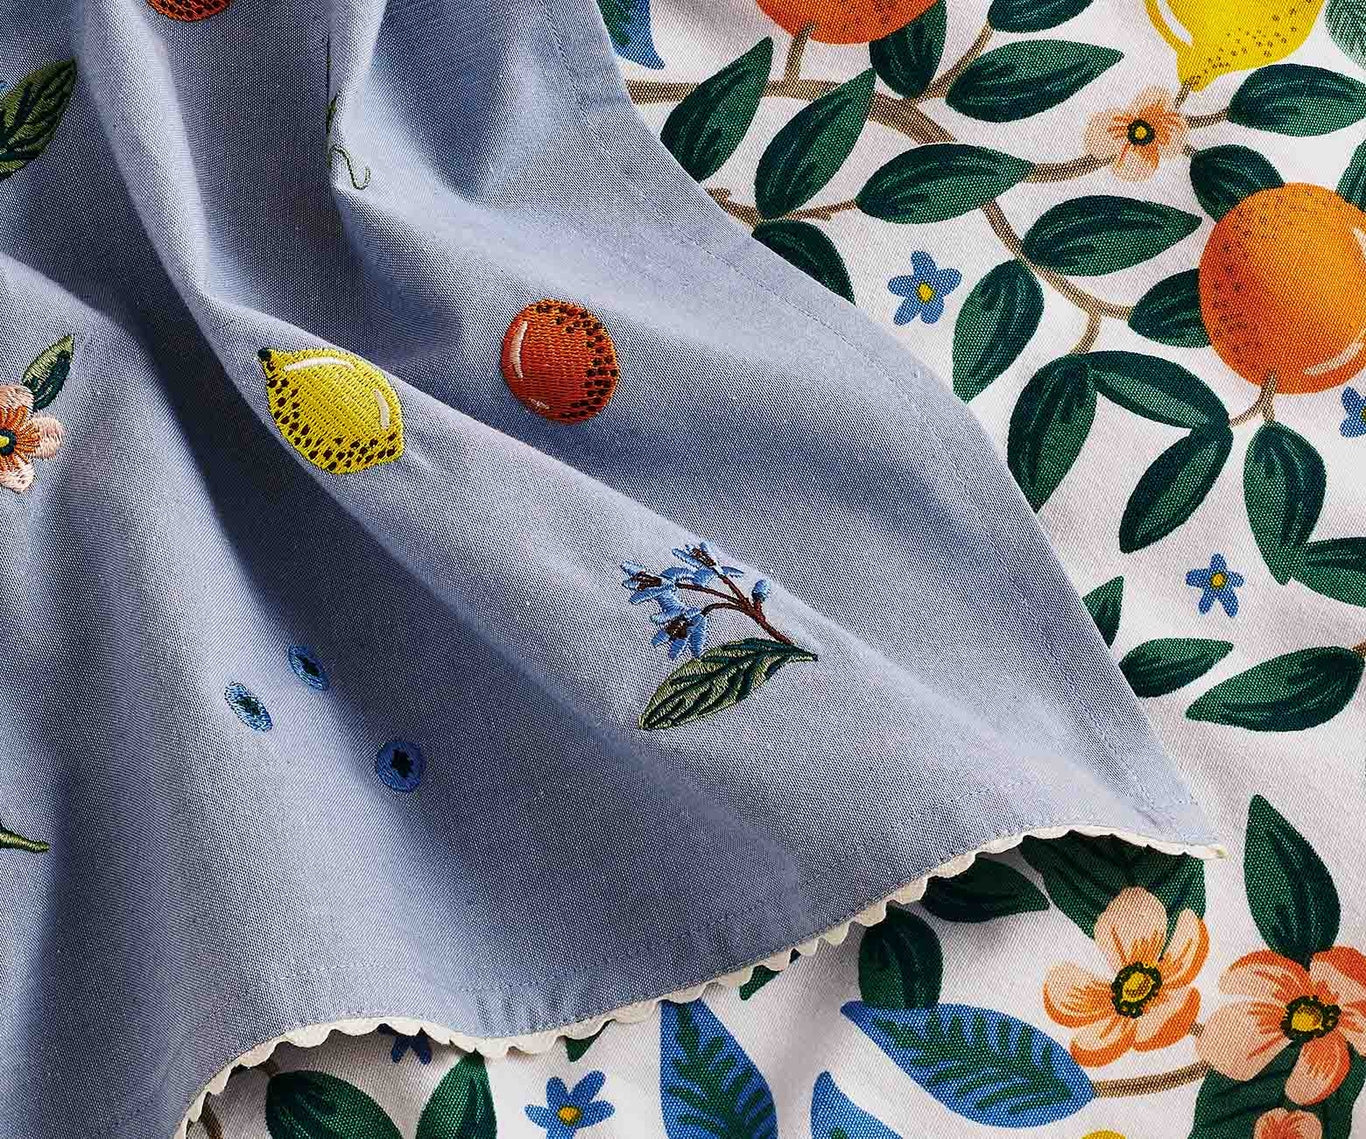 Rifle Paper Co Embroidered Tea Towel - Fruit Stand